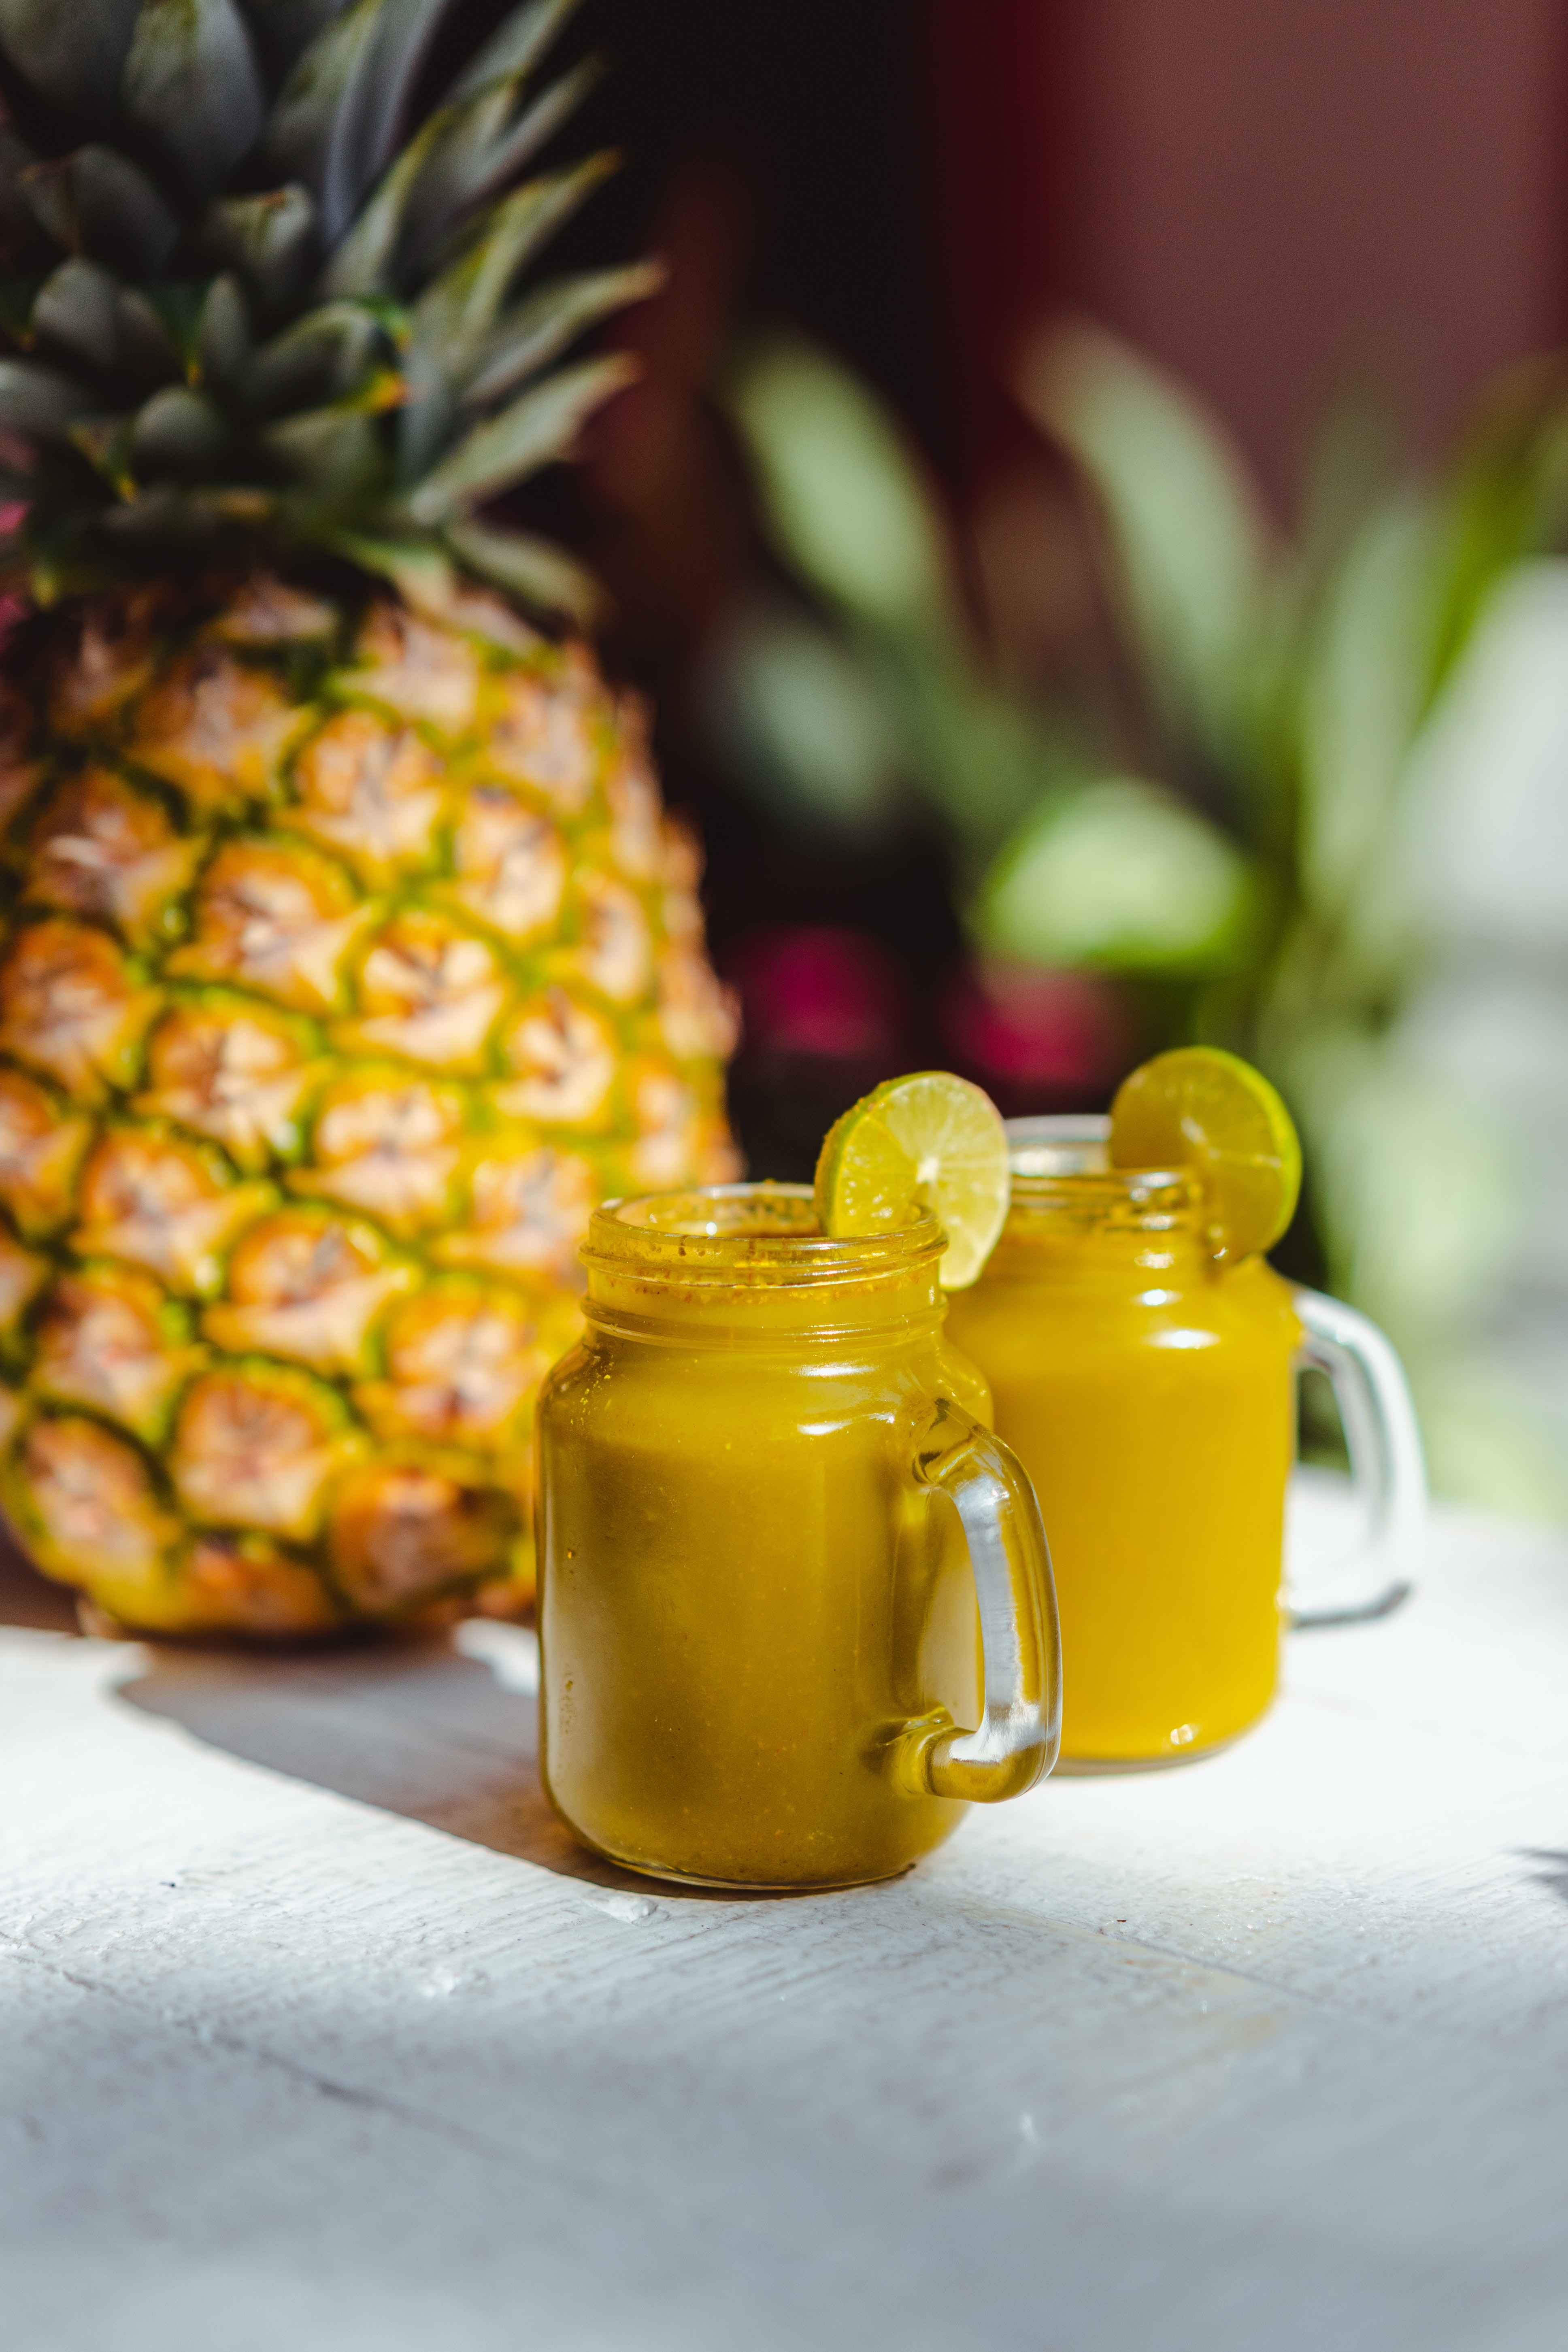 13 ways drinking pineapple juice after wisdom teeth surgery can help in recovery